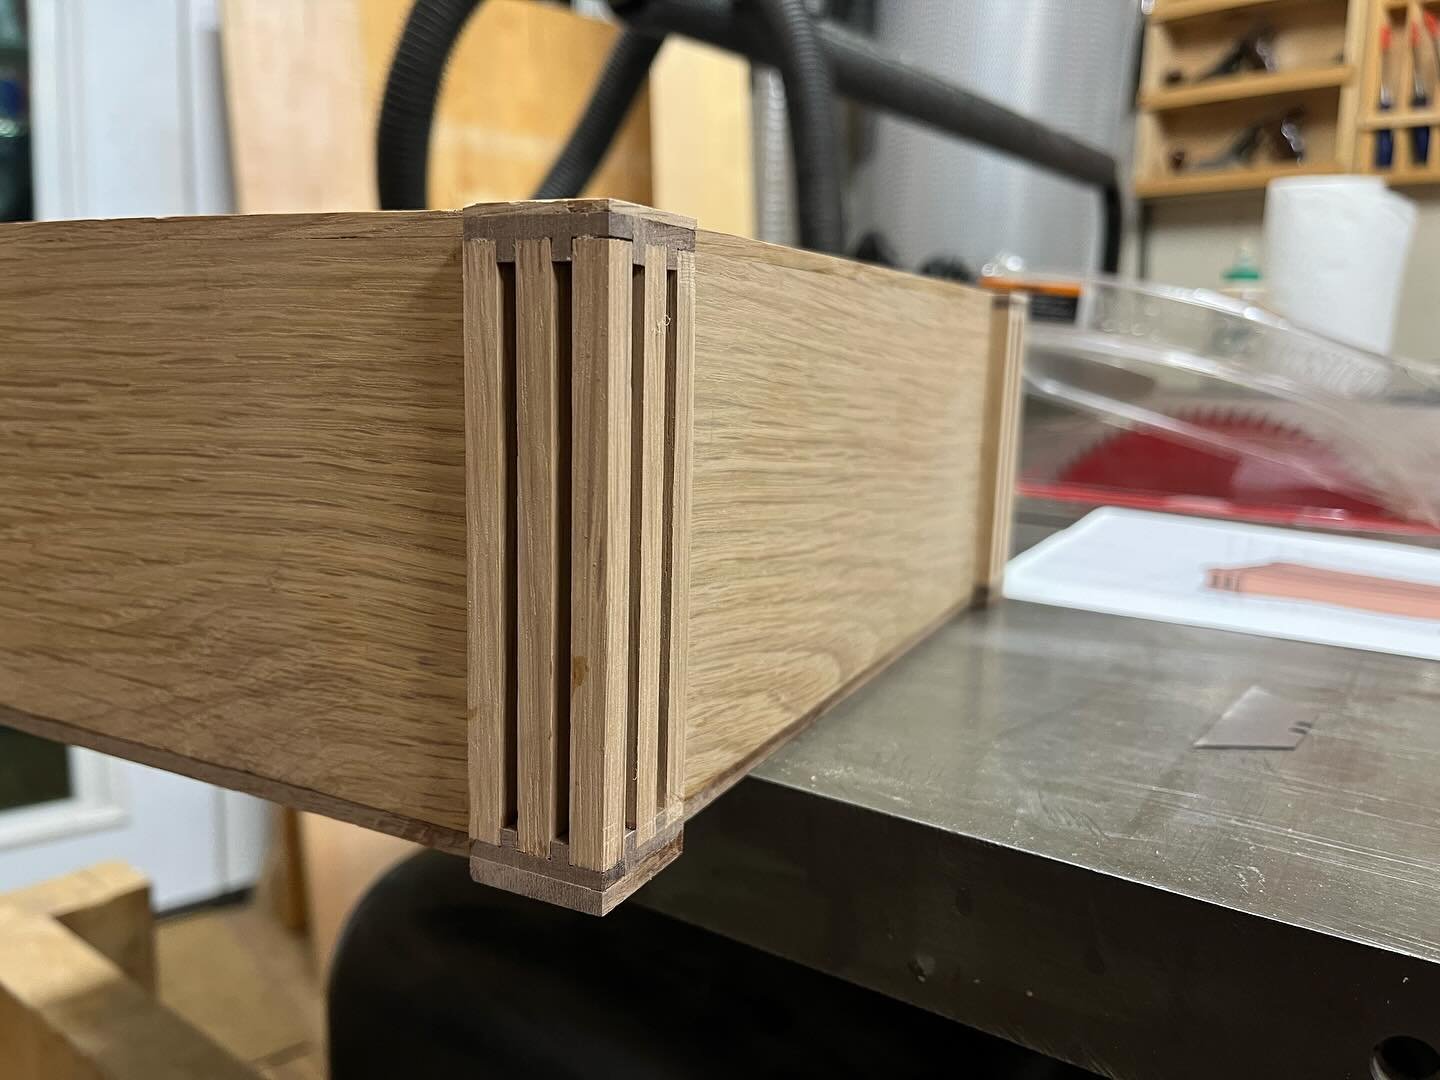 Companion box for the Krenov-Wright cabinet from a selection of off cuts. Keeping the scale consistent was tricky. 1/4&rdquo; x 1/4&rdquo; columns and 1/8&rdquo; thick trim work. 😬